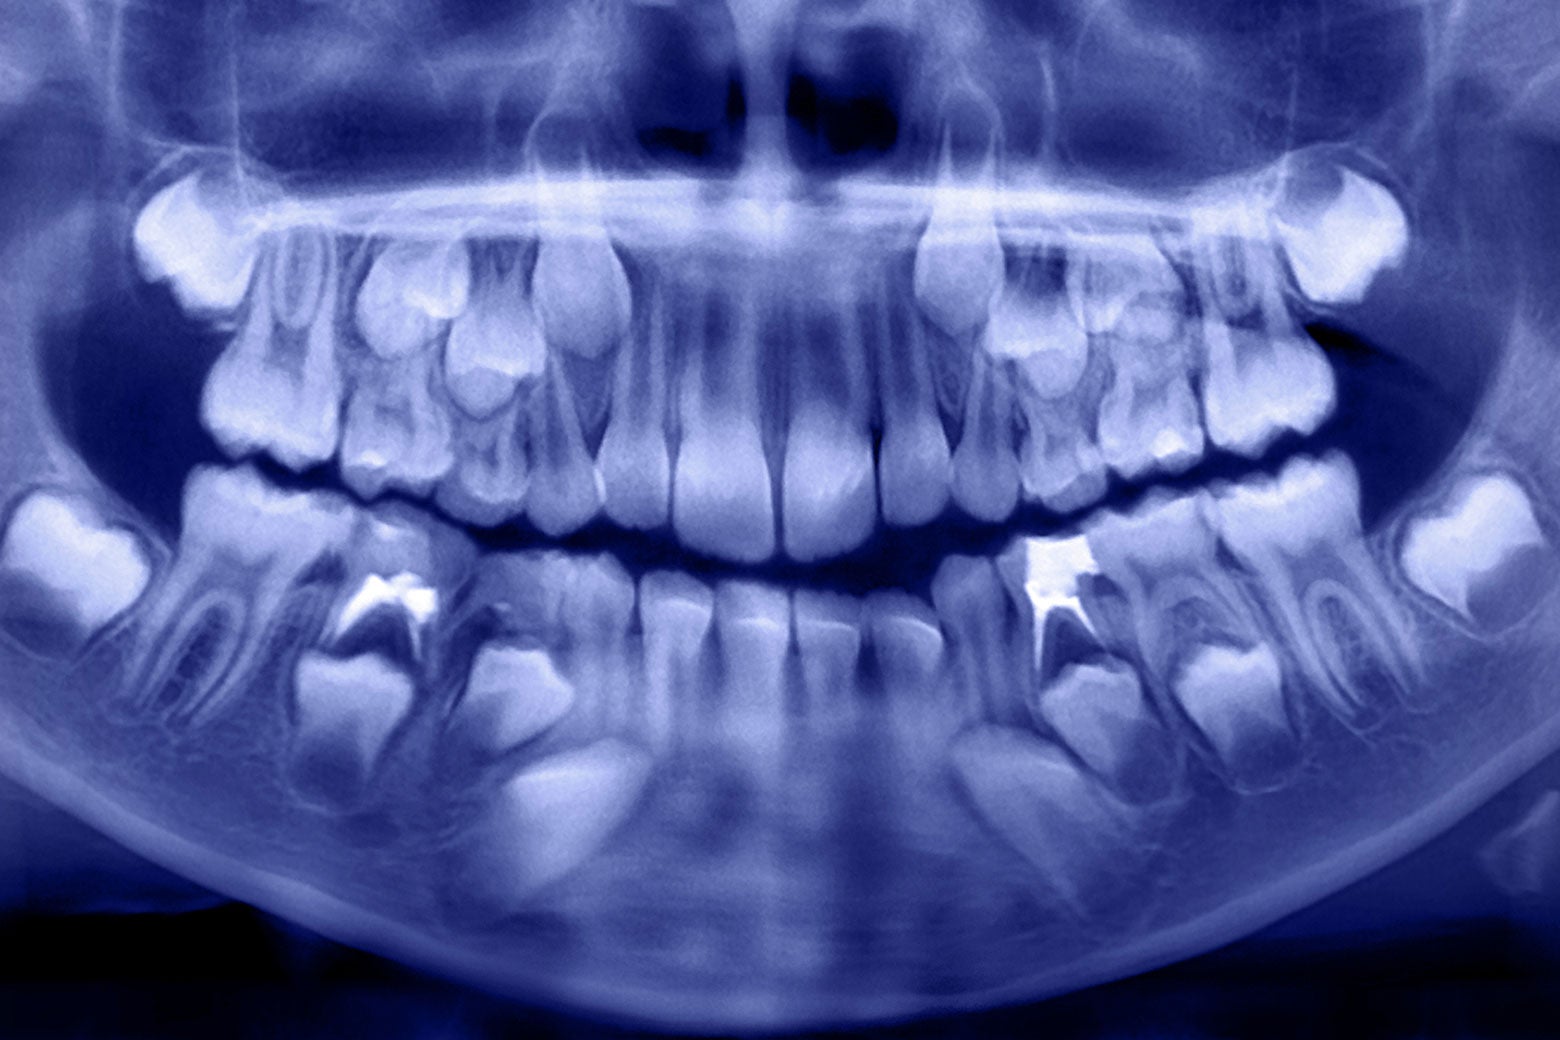 An X-ray of a child's mouth, containing baby and adult teeth.